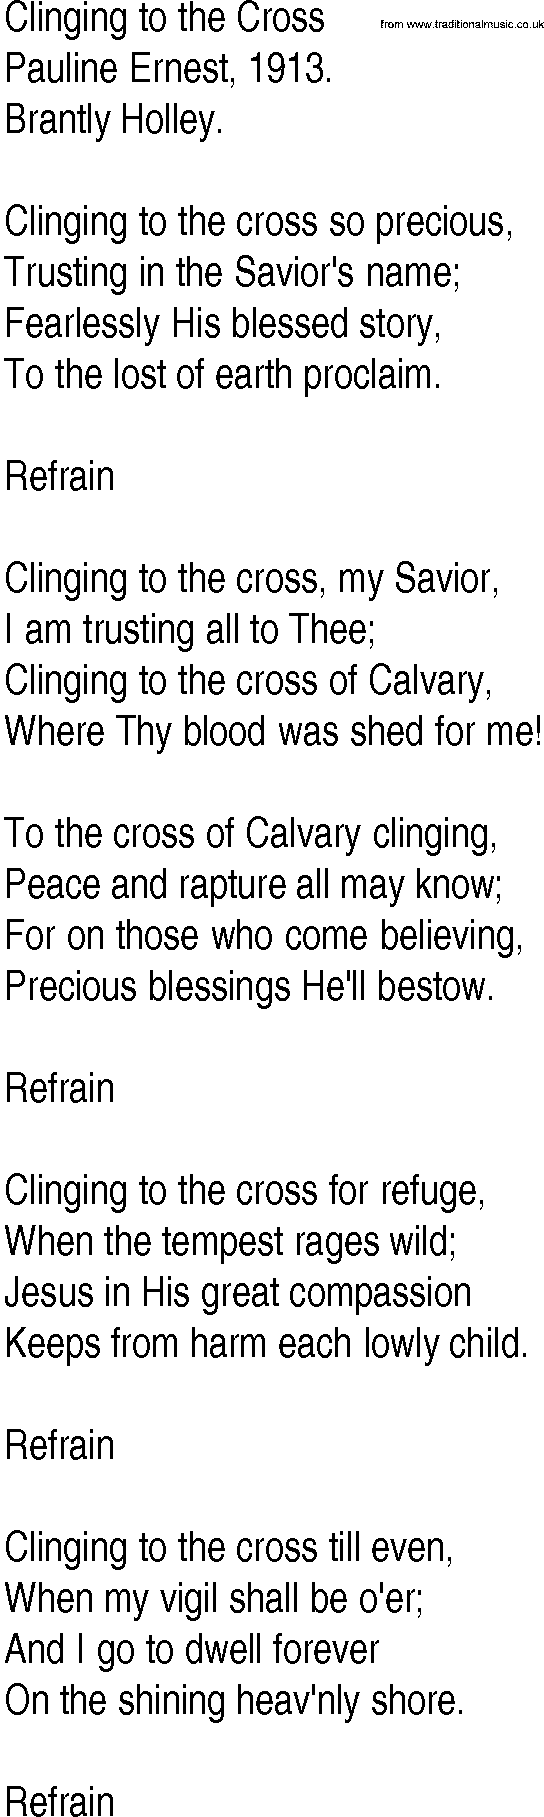 Hymn and Gospel Song: Clinging to the Cross by Pauline Ernest lyrics